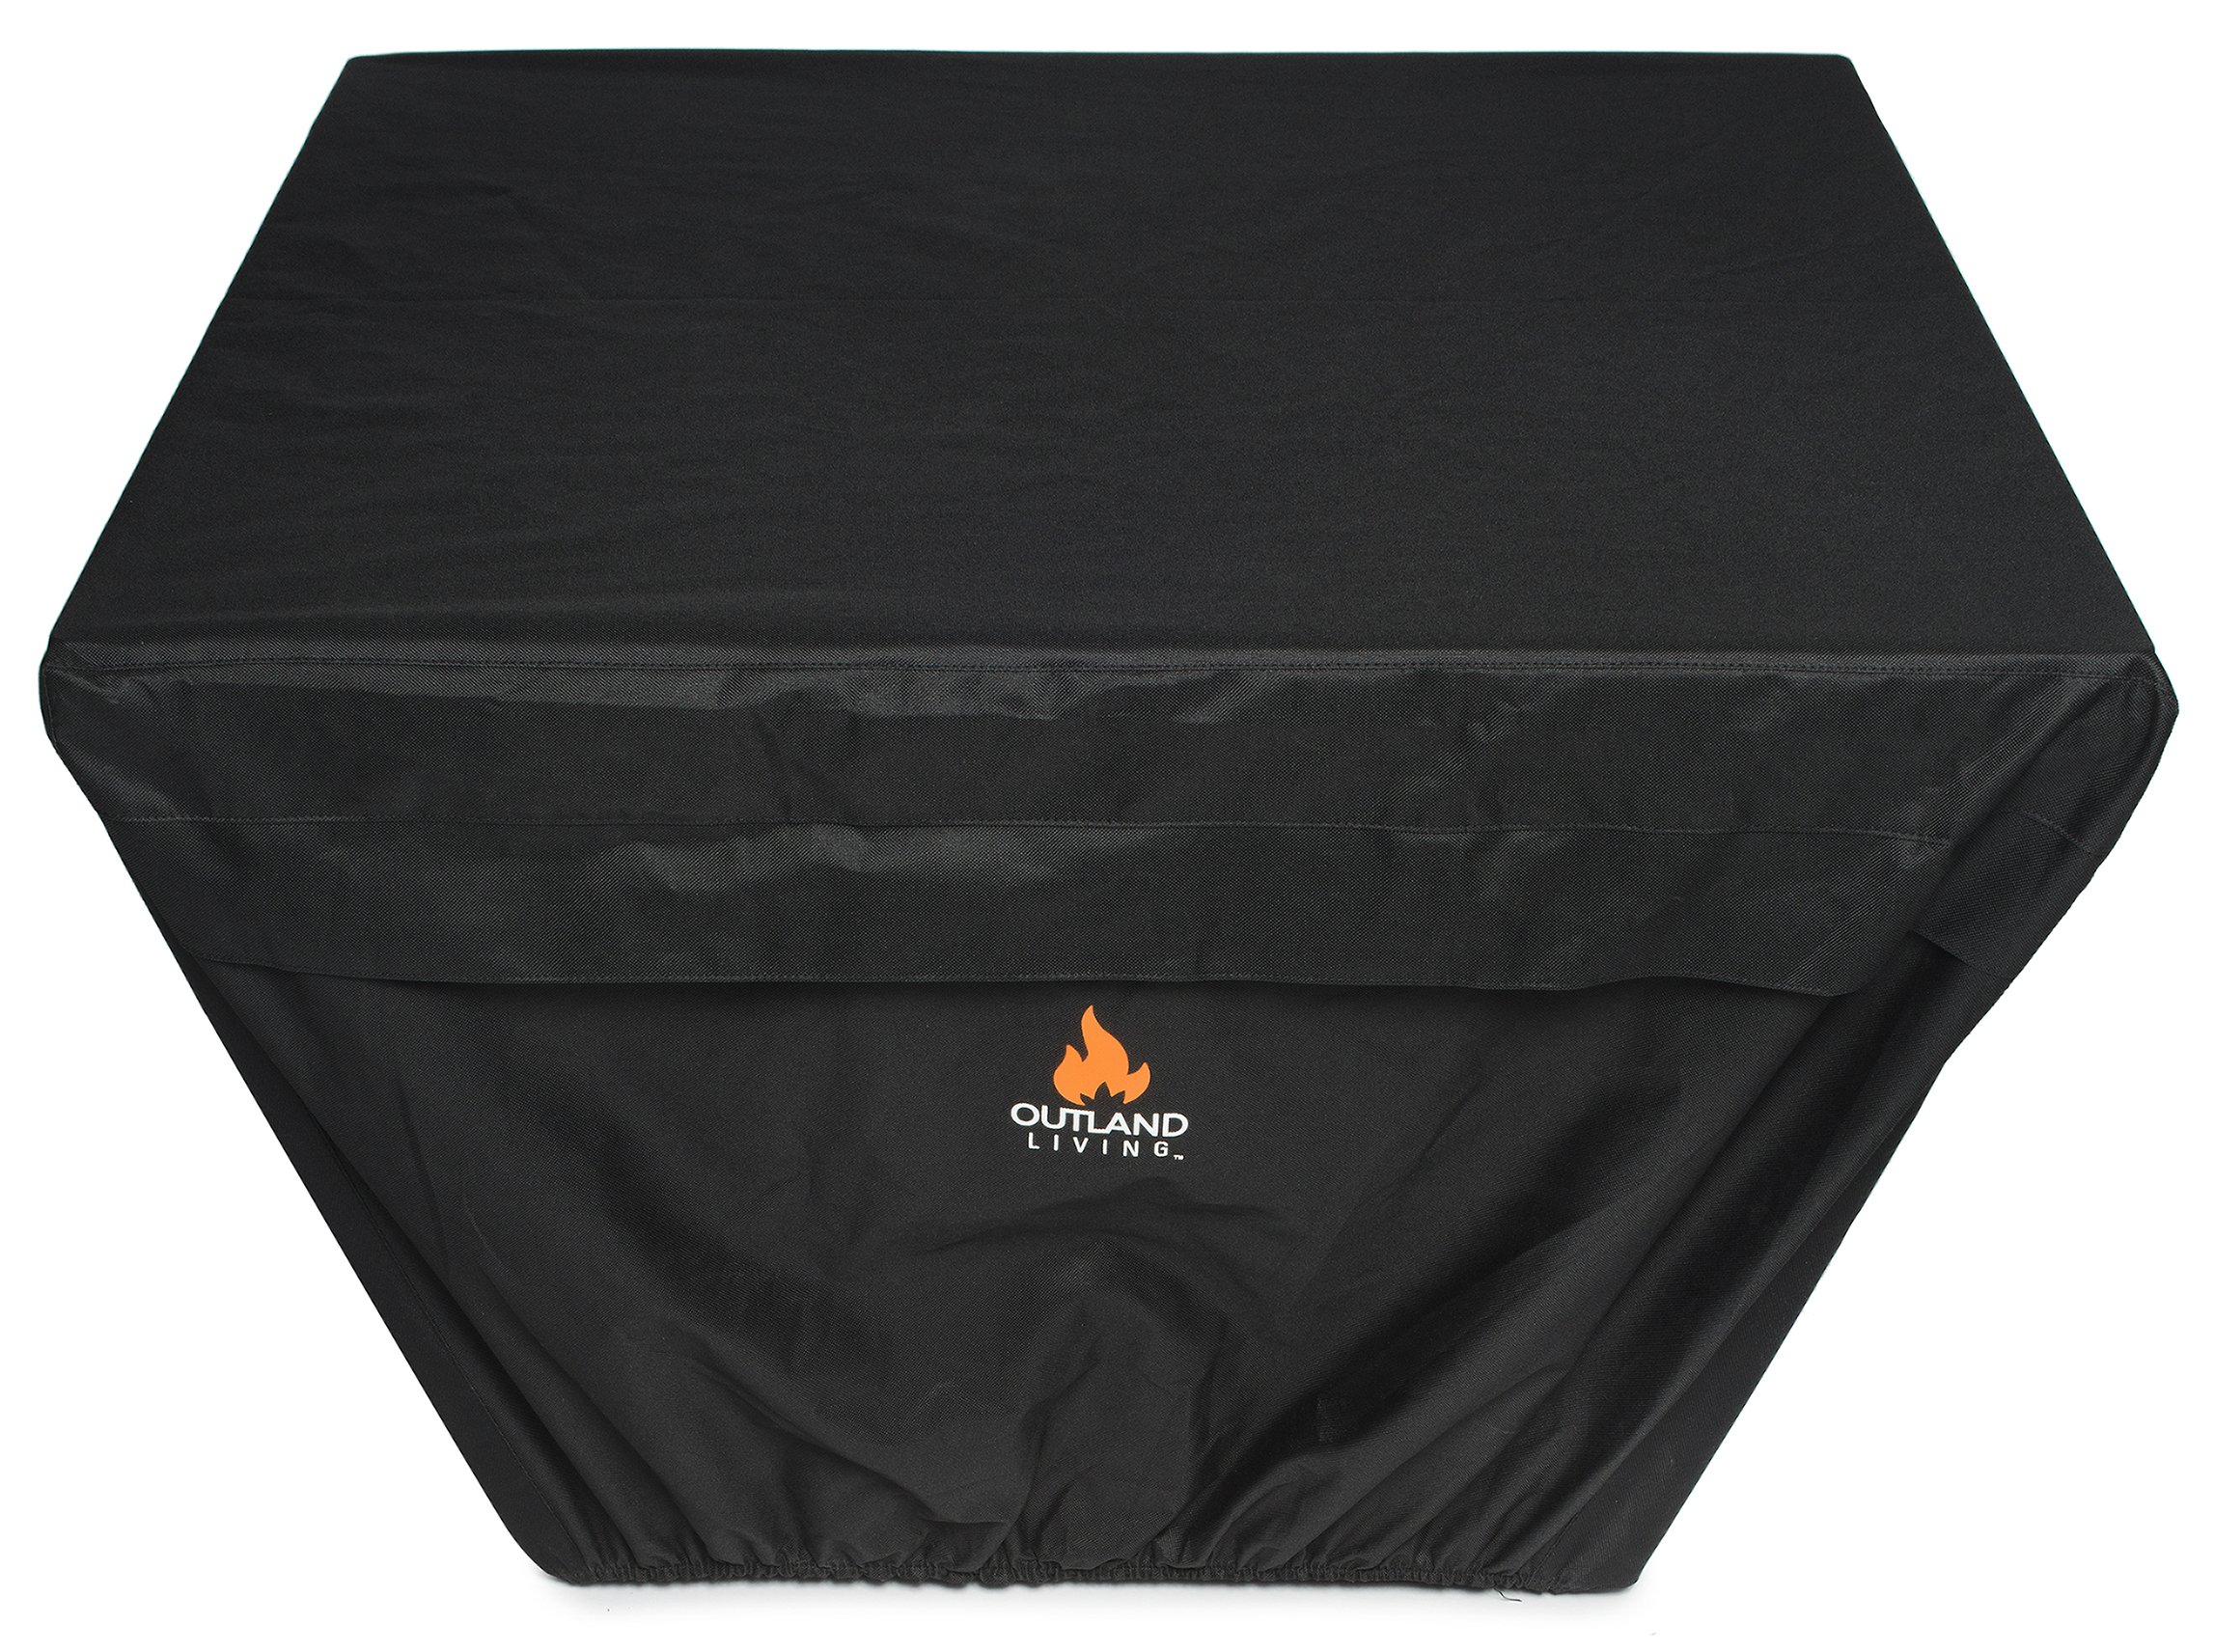 Outland Fire Table UV & Water Resistant Durable Cover for 36-Inch Square Series 410 Outdoor Propane Fire Pit Tables, Square 37-Inch x 26-Inch - Breathable Venting with Mesh Barriers & Watertight Seams